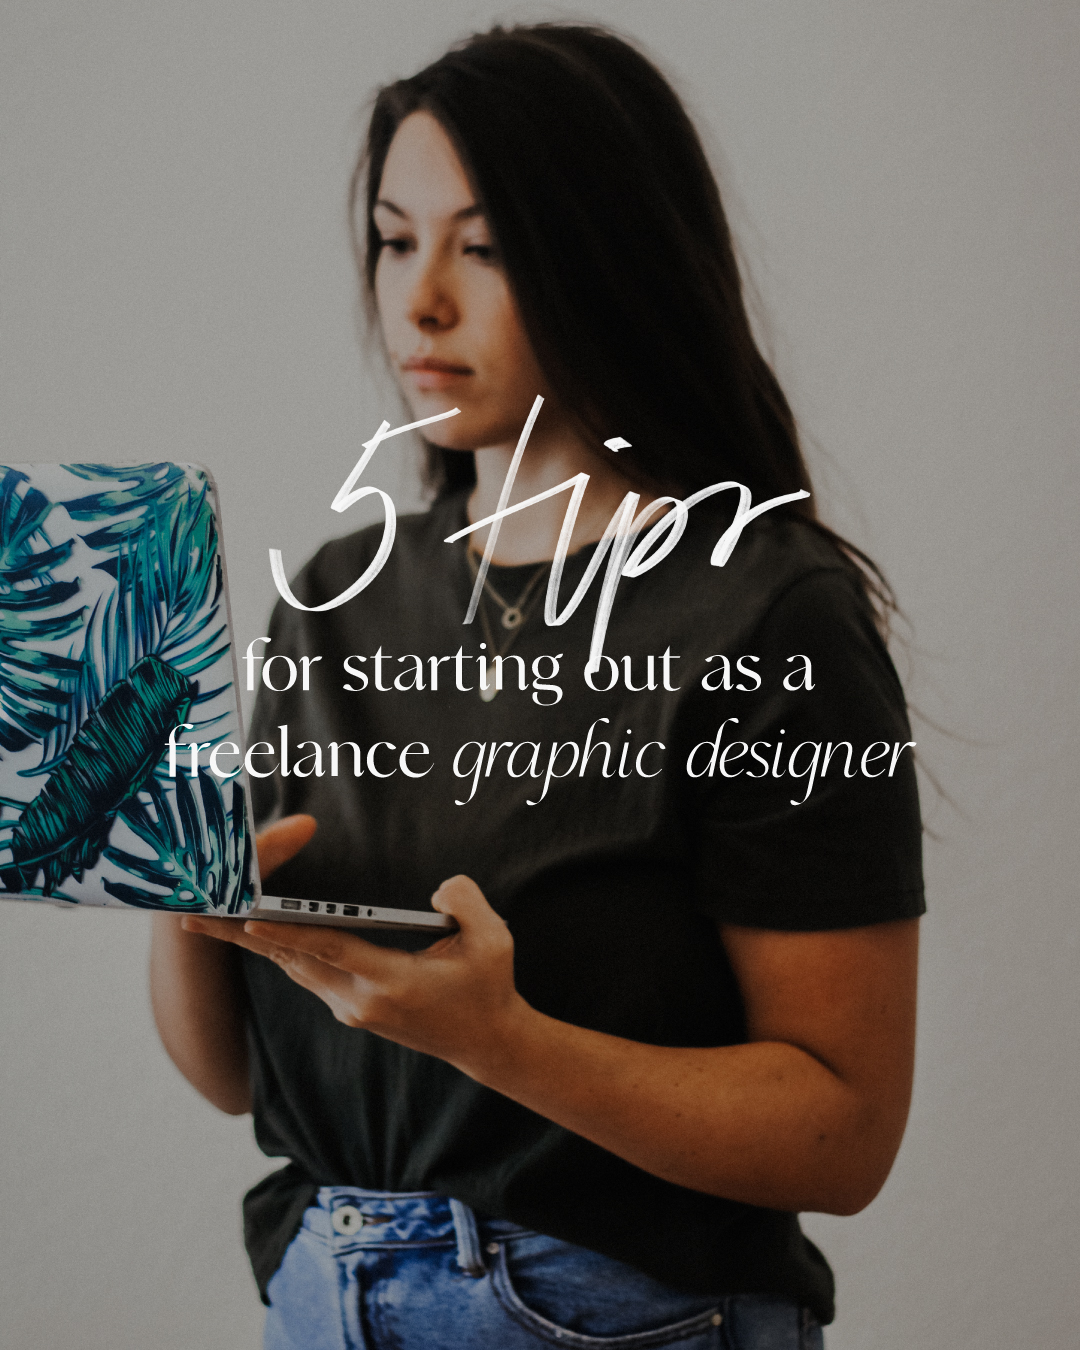 starting-out-as-graphic-designer-5-tips